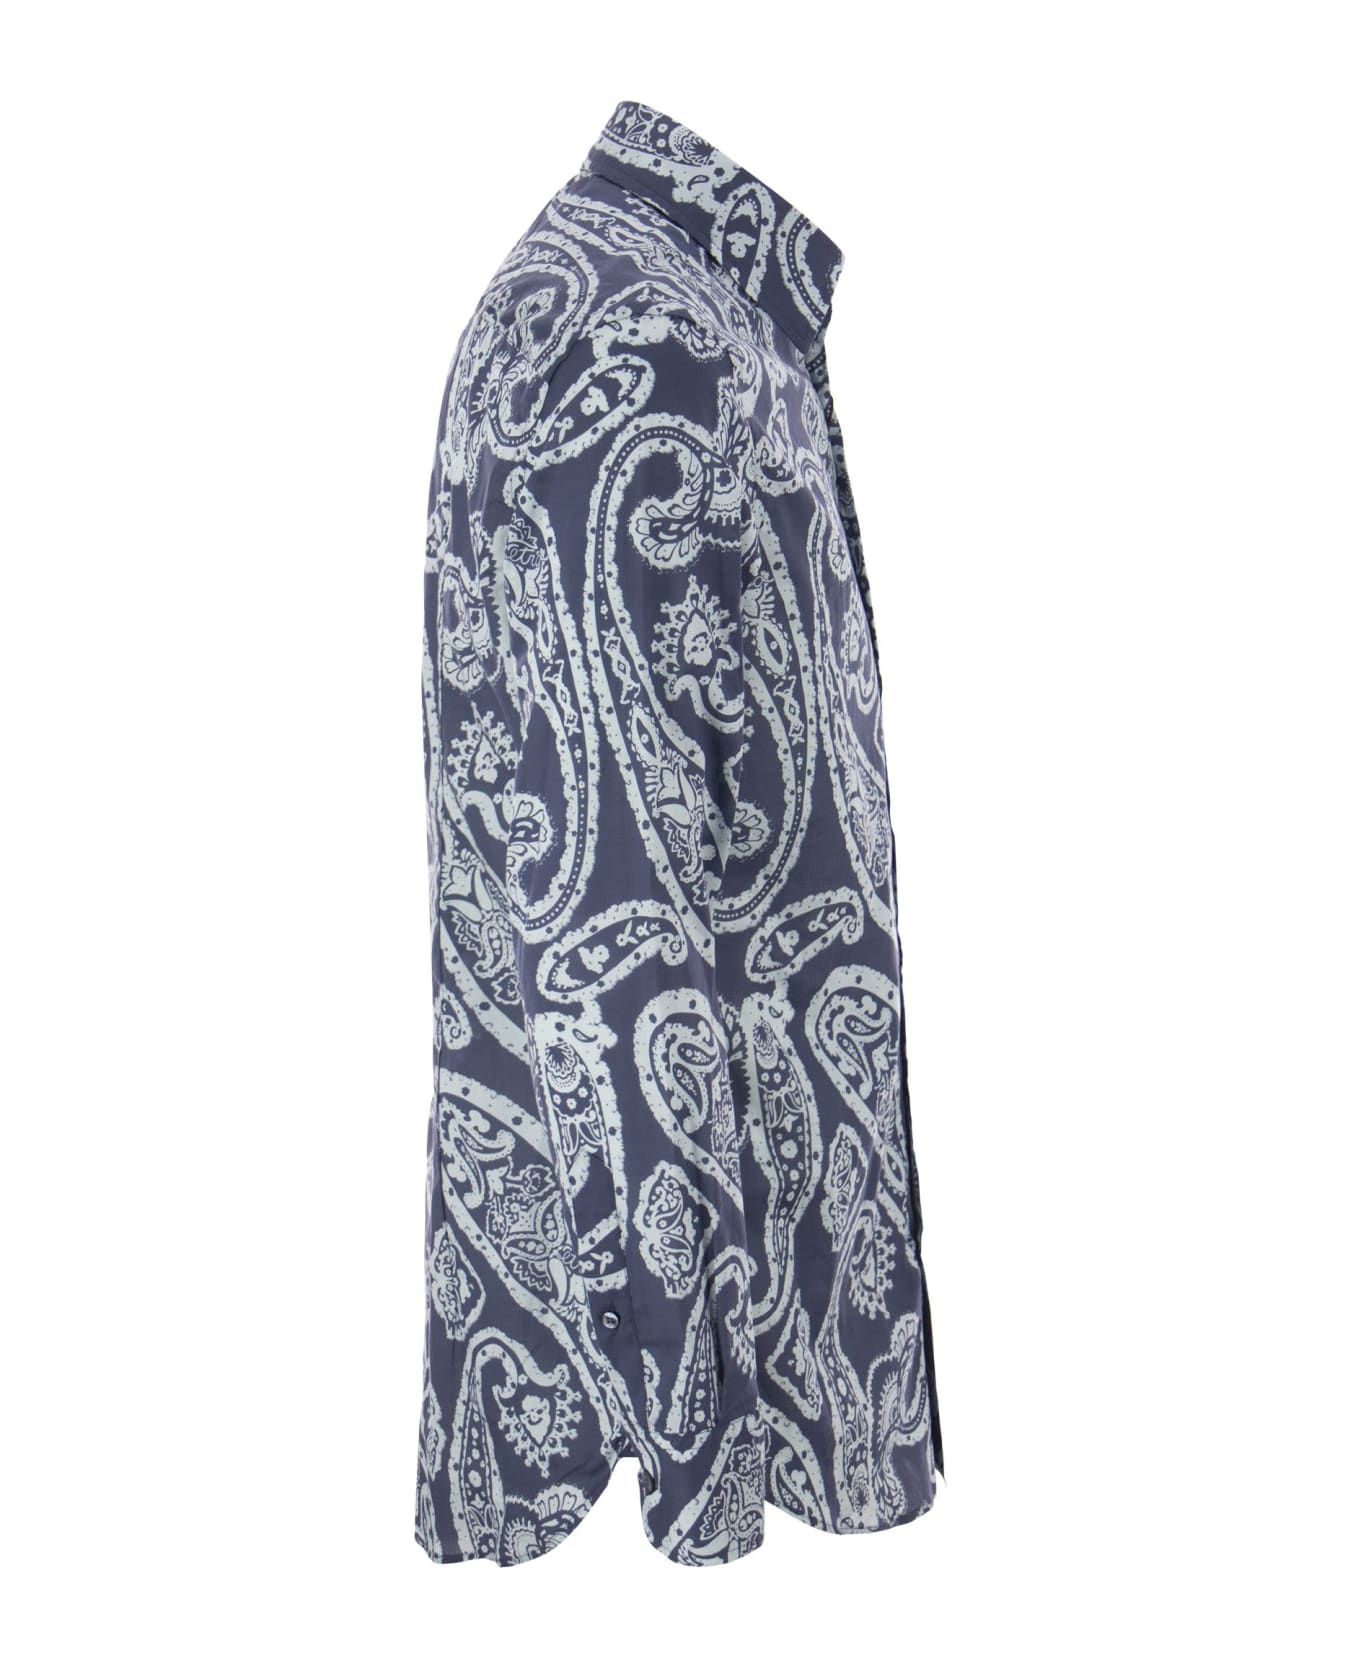 Etro Slim Fit Shirt With Paisley Pattern - Blue